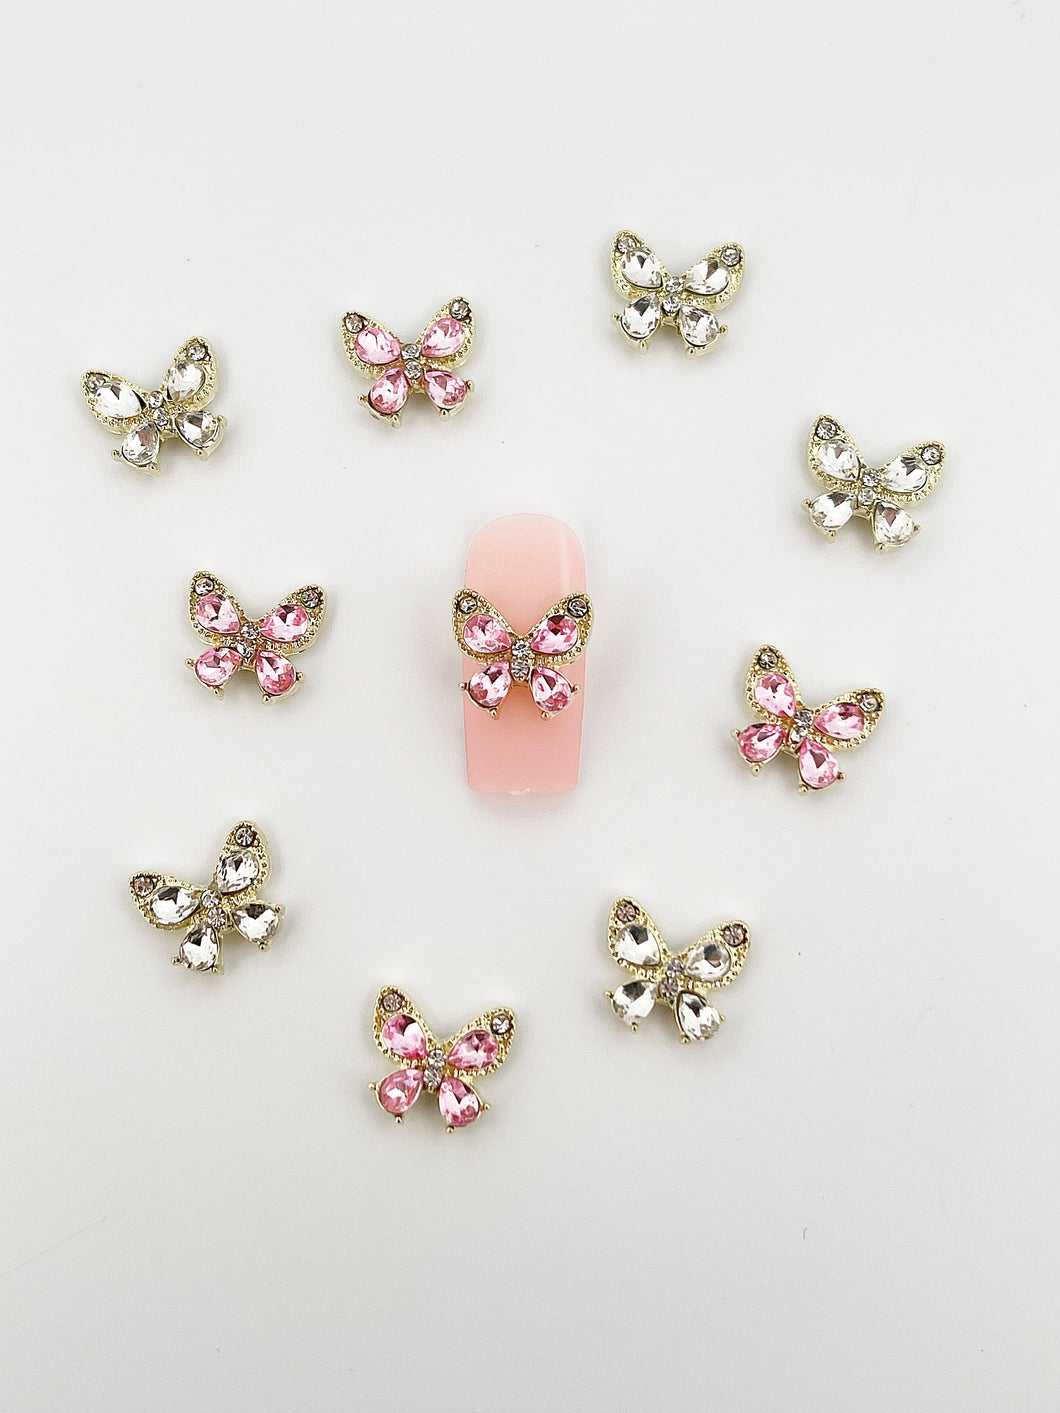 Alloy Nail 3D Charms #13 - 10 Pieces